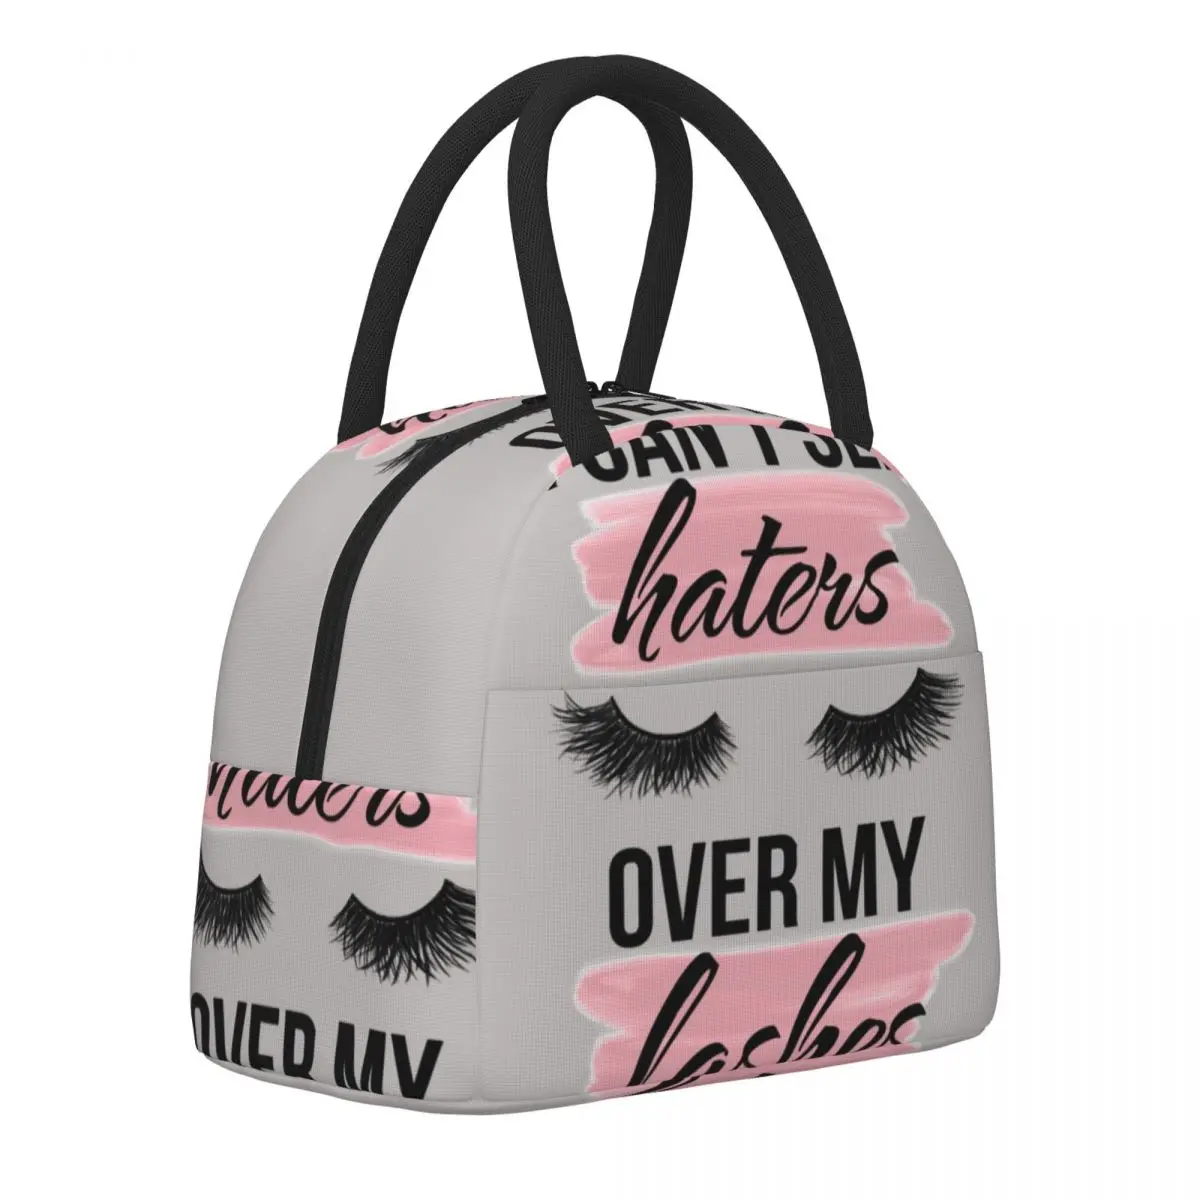 

Cant See Haters Over Lashes Lunch Bag Make Up School Lunch Box Casual Graphic Thermal Lunch Bags Waterproof Portable Cooler Bag